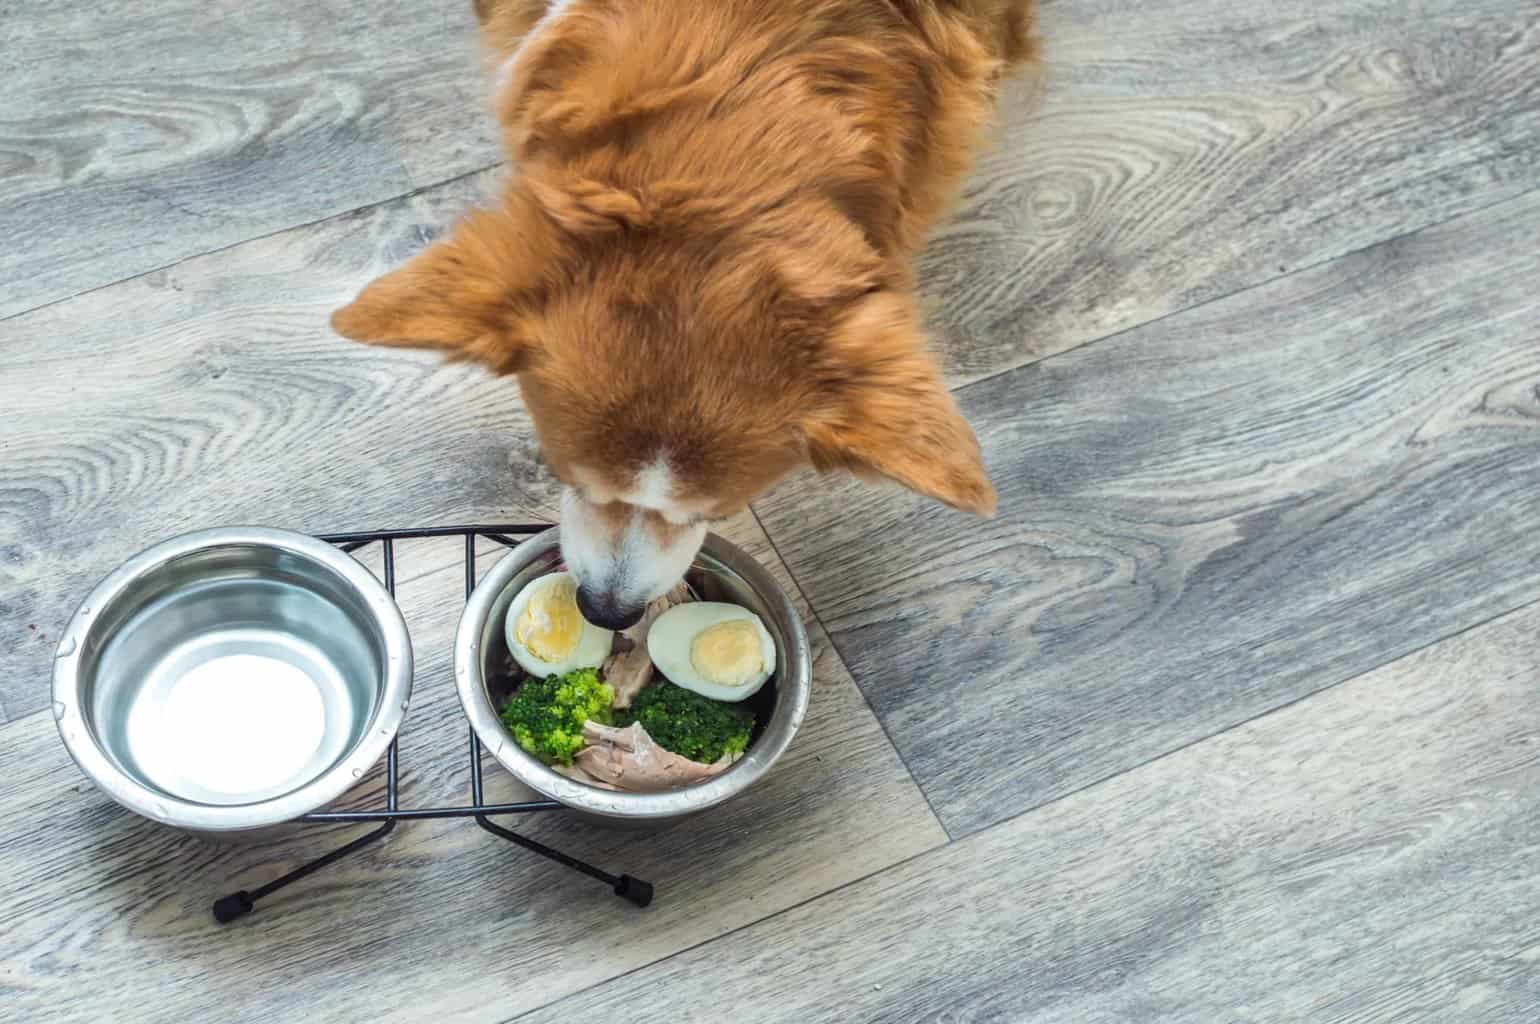 Dog eats food with hardboiled eggs on top. Eggs are rich in nutrients and minerals that can support your dog's skin and coat health, so adding one to your dog's diet is safe and healthy.